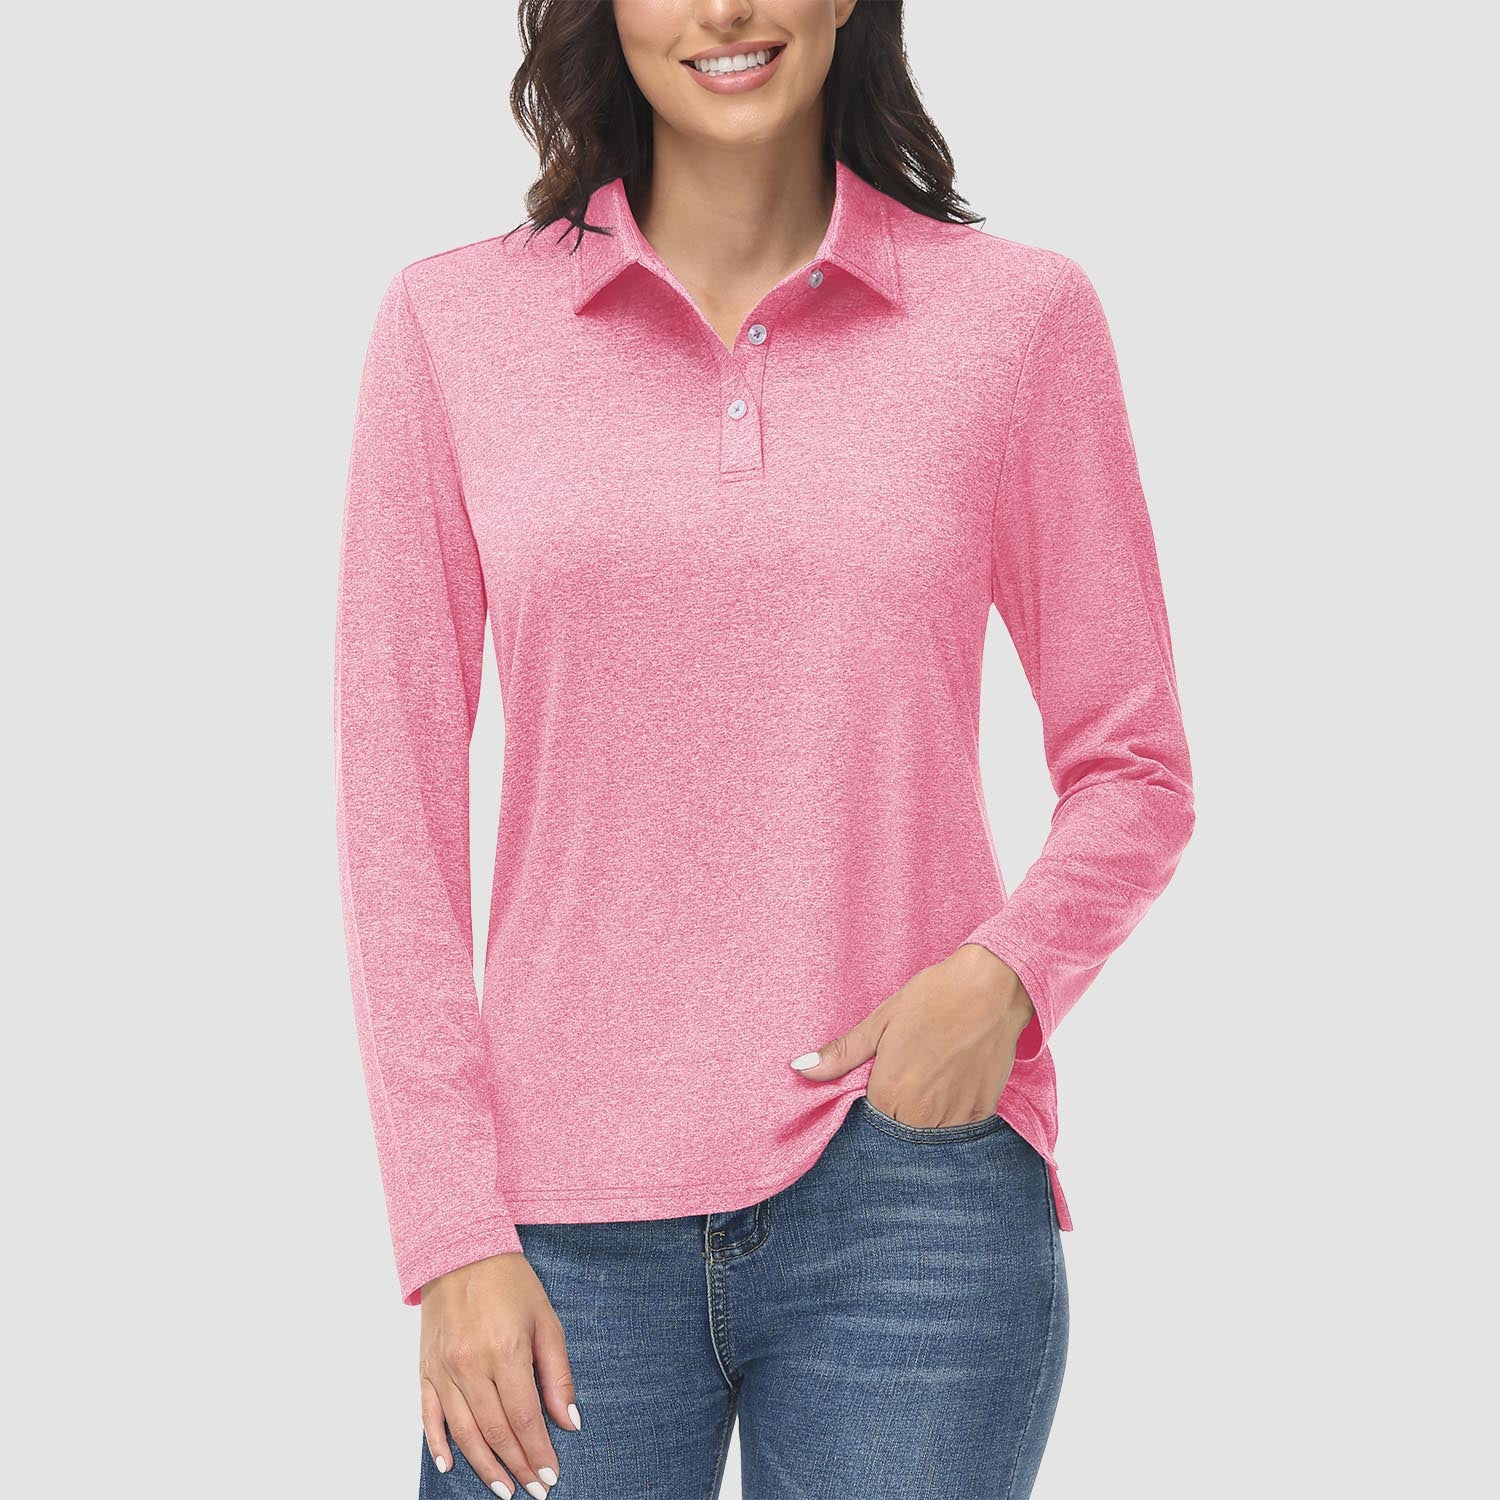 Women's Polo Shirts Long Sleeve UPF 50+ Sun Protection Golf Shirts Quick Dry Athletic Workout Collared Shirt